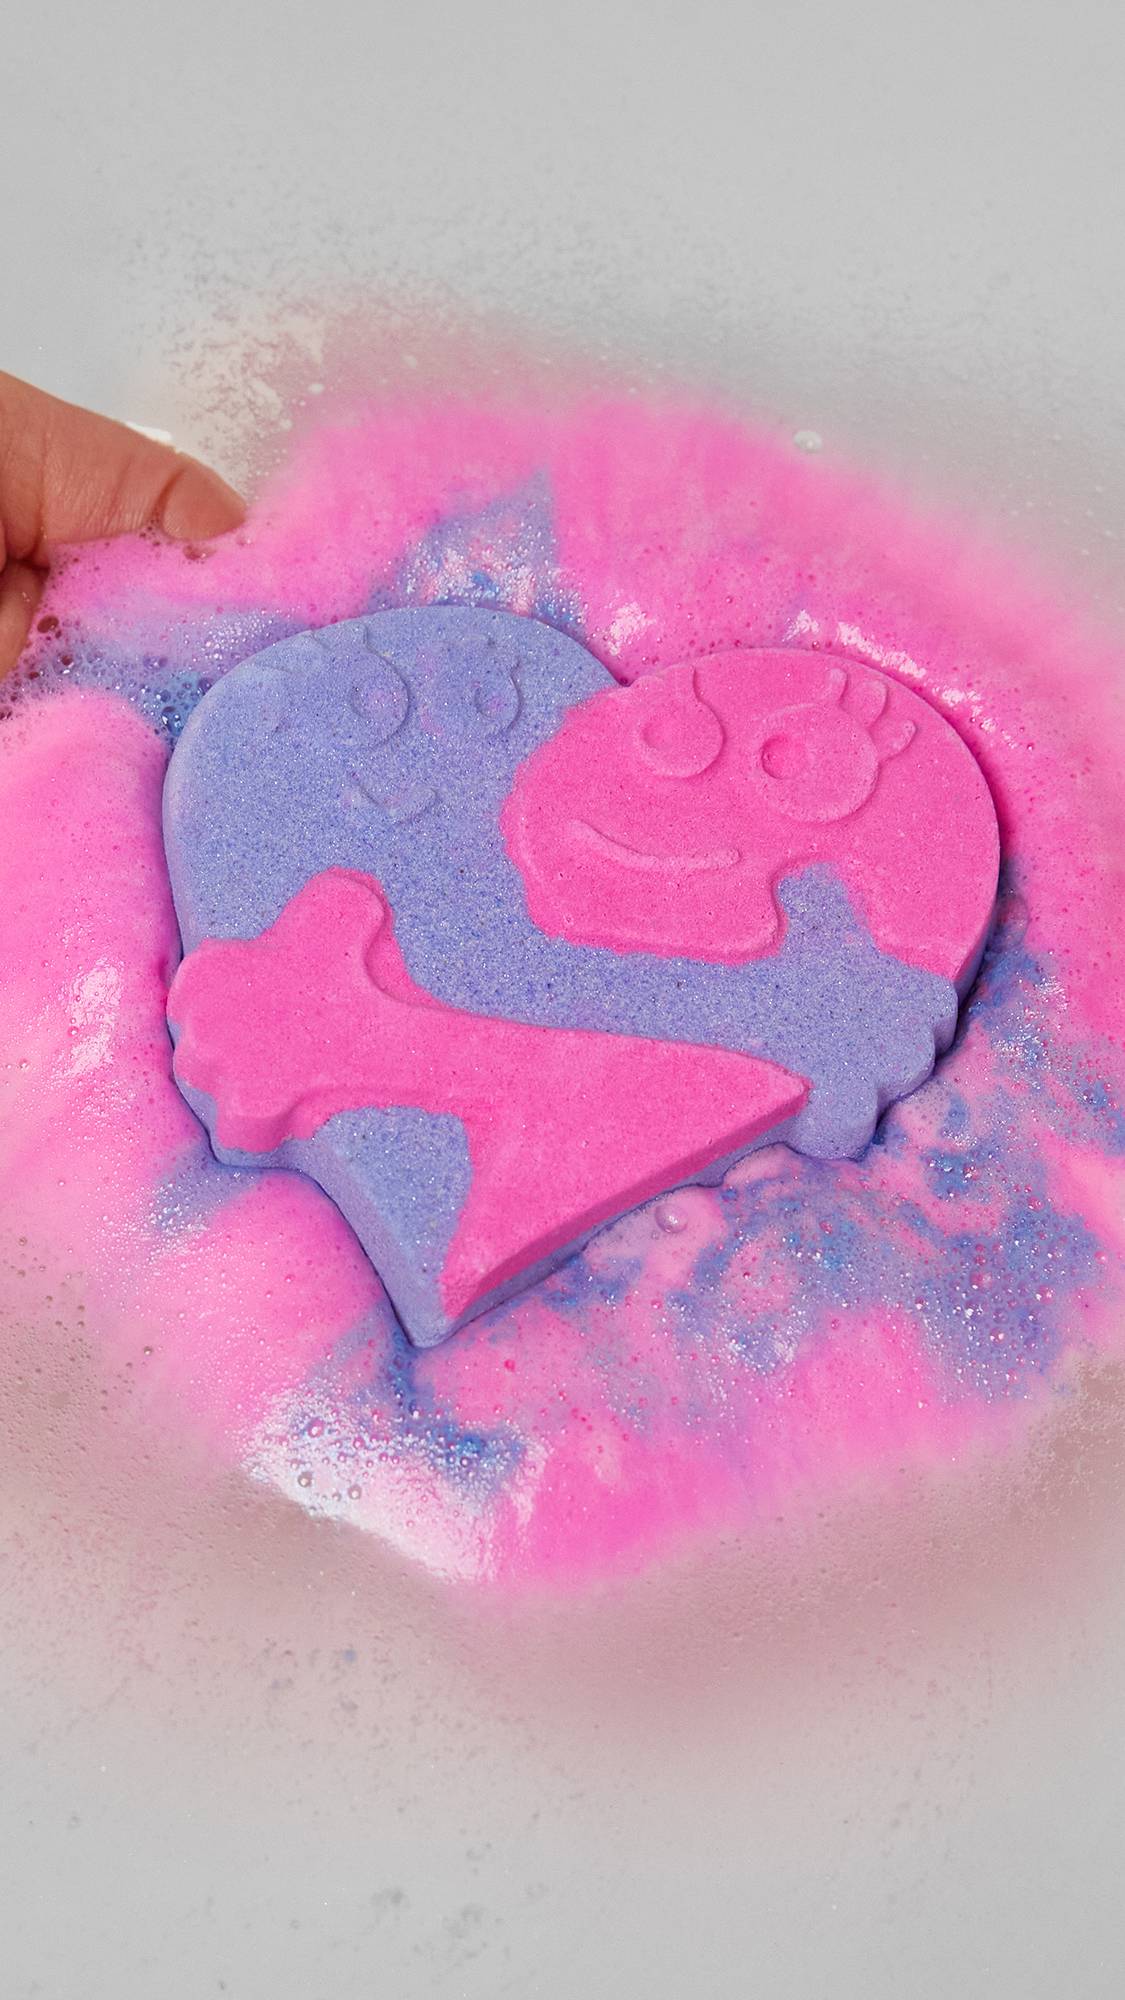 Image shows a close-up of the model gently placing the Big Squeeze bath bomb into the water as vivid purple and pink foam is expelled.